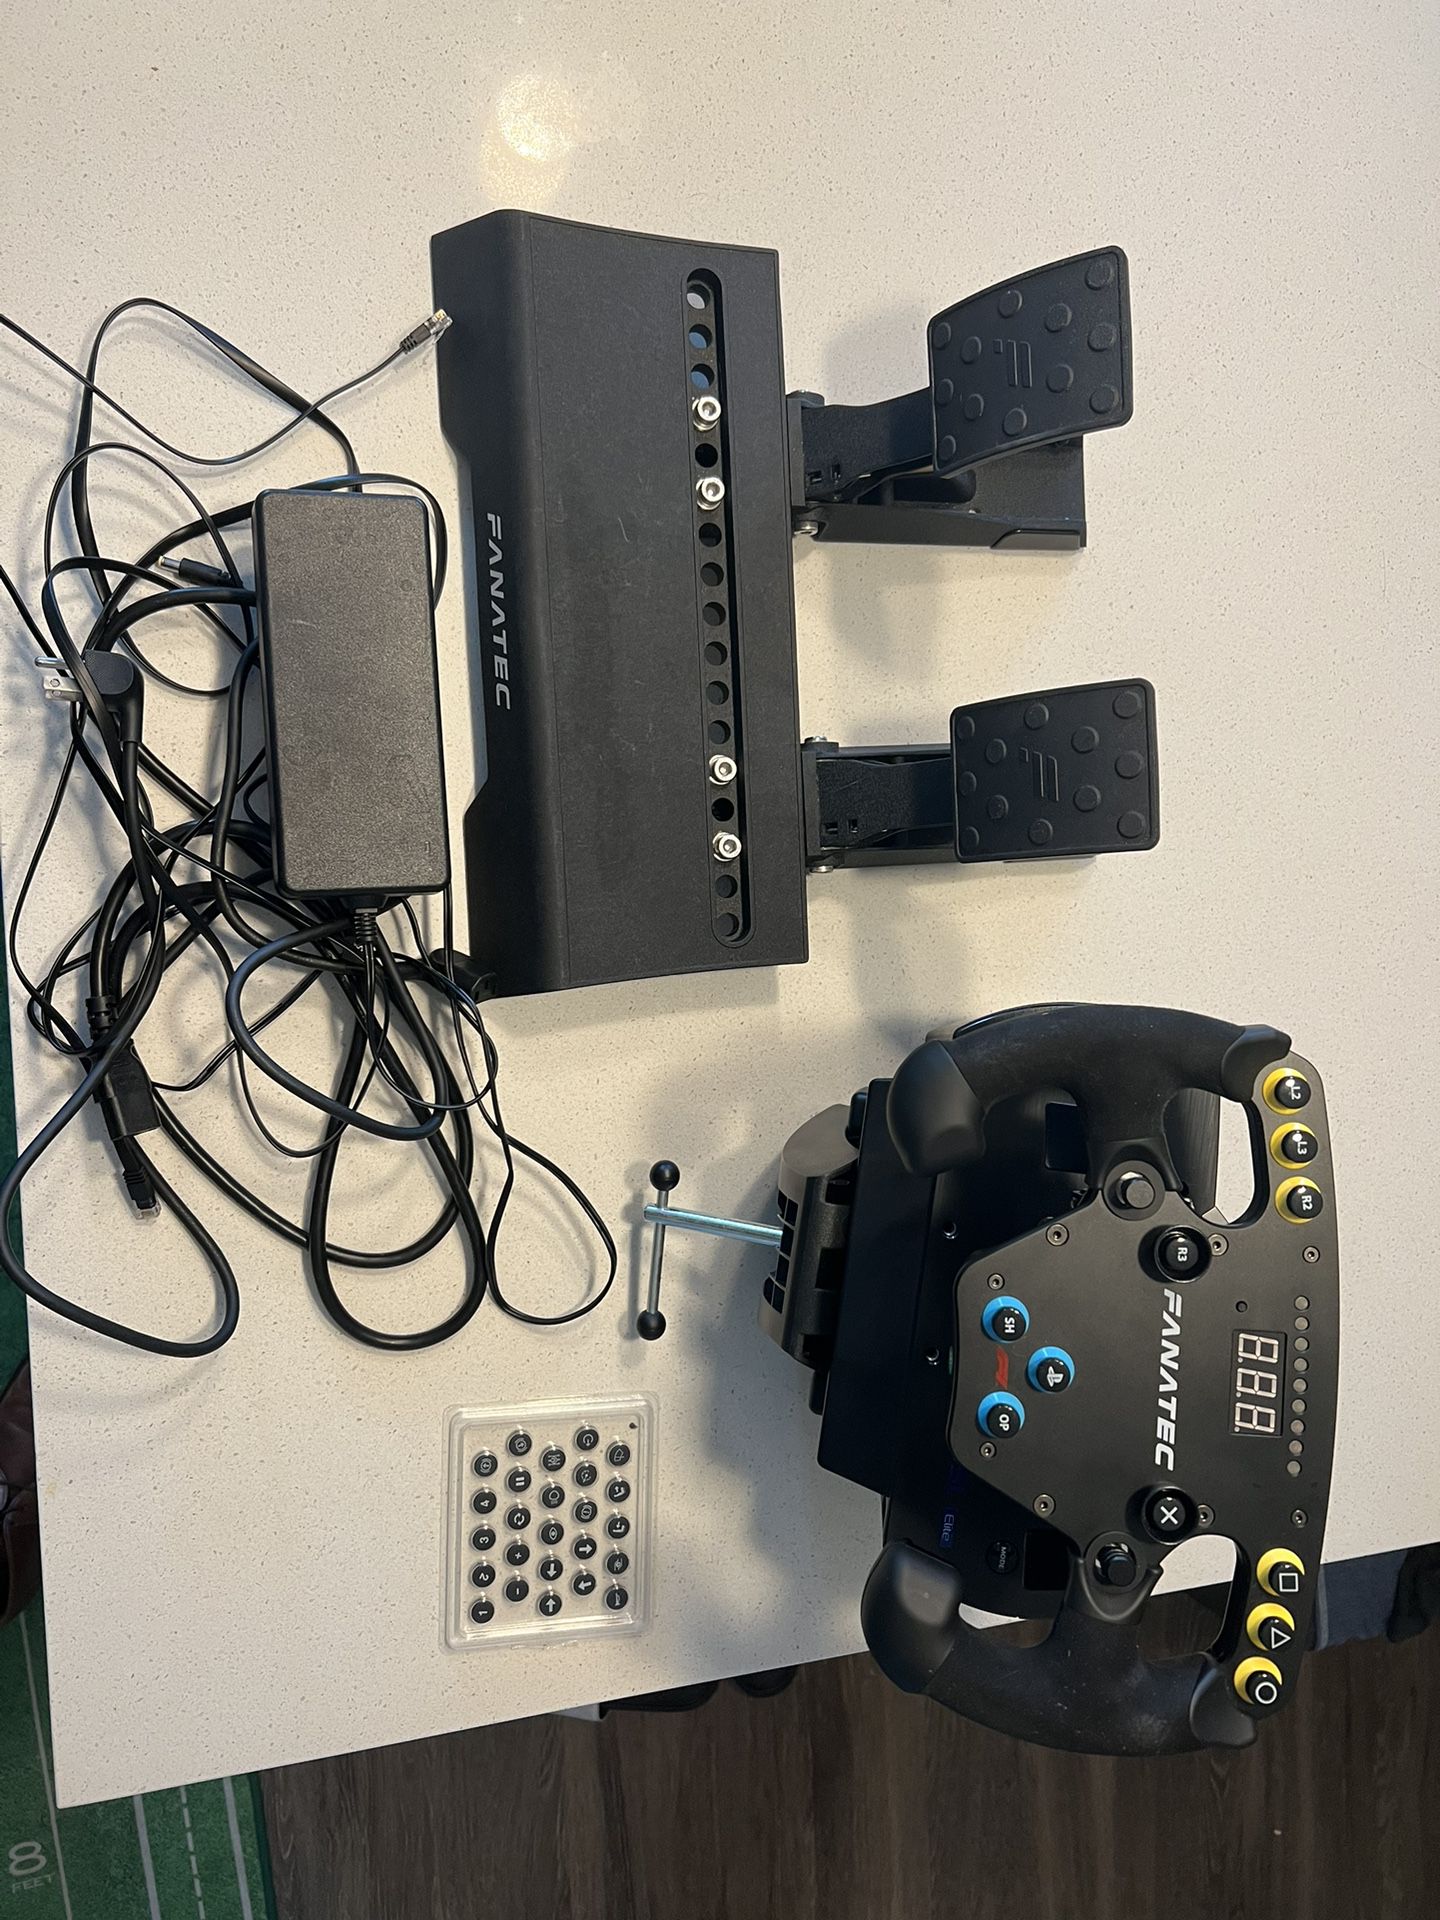 Fanatec CSL Elite F1 bundle For PlayStation and PC for Sale Charleston, SC - OfferUp